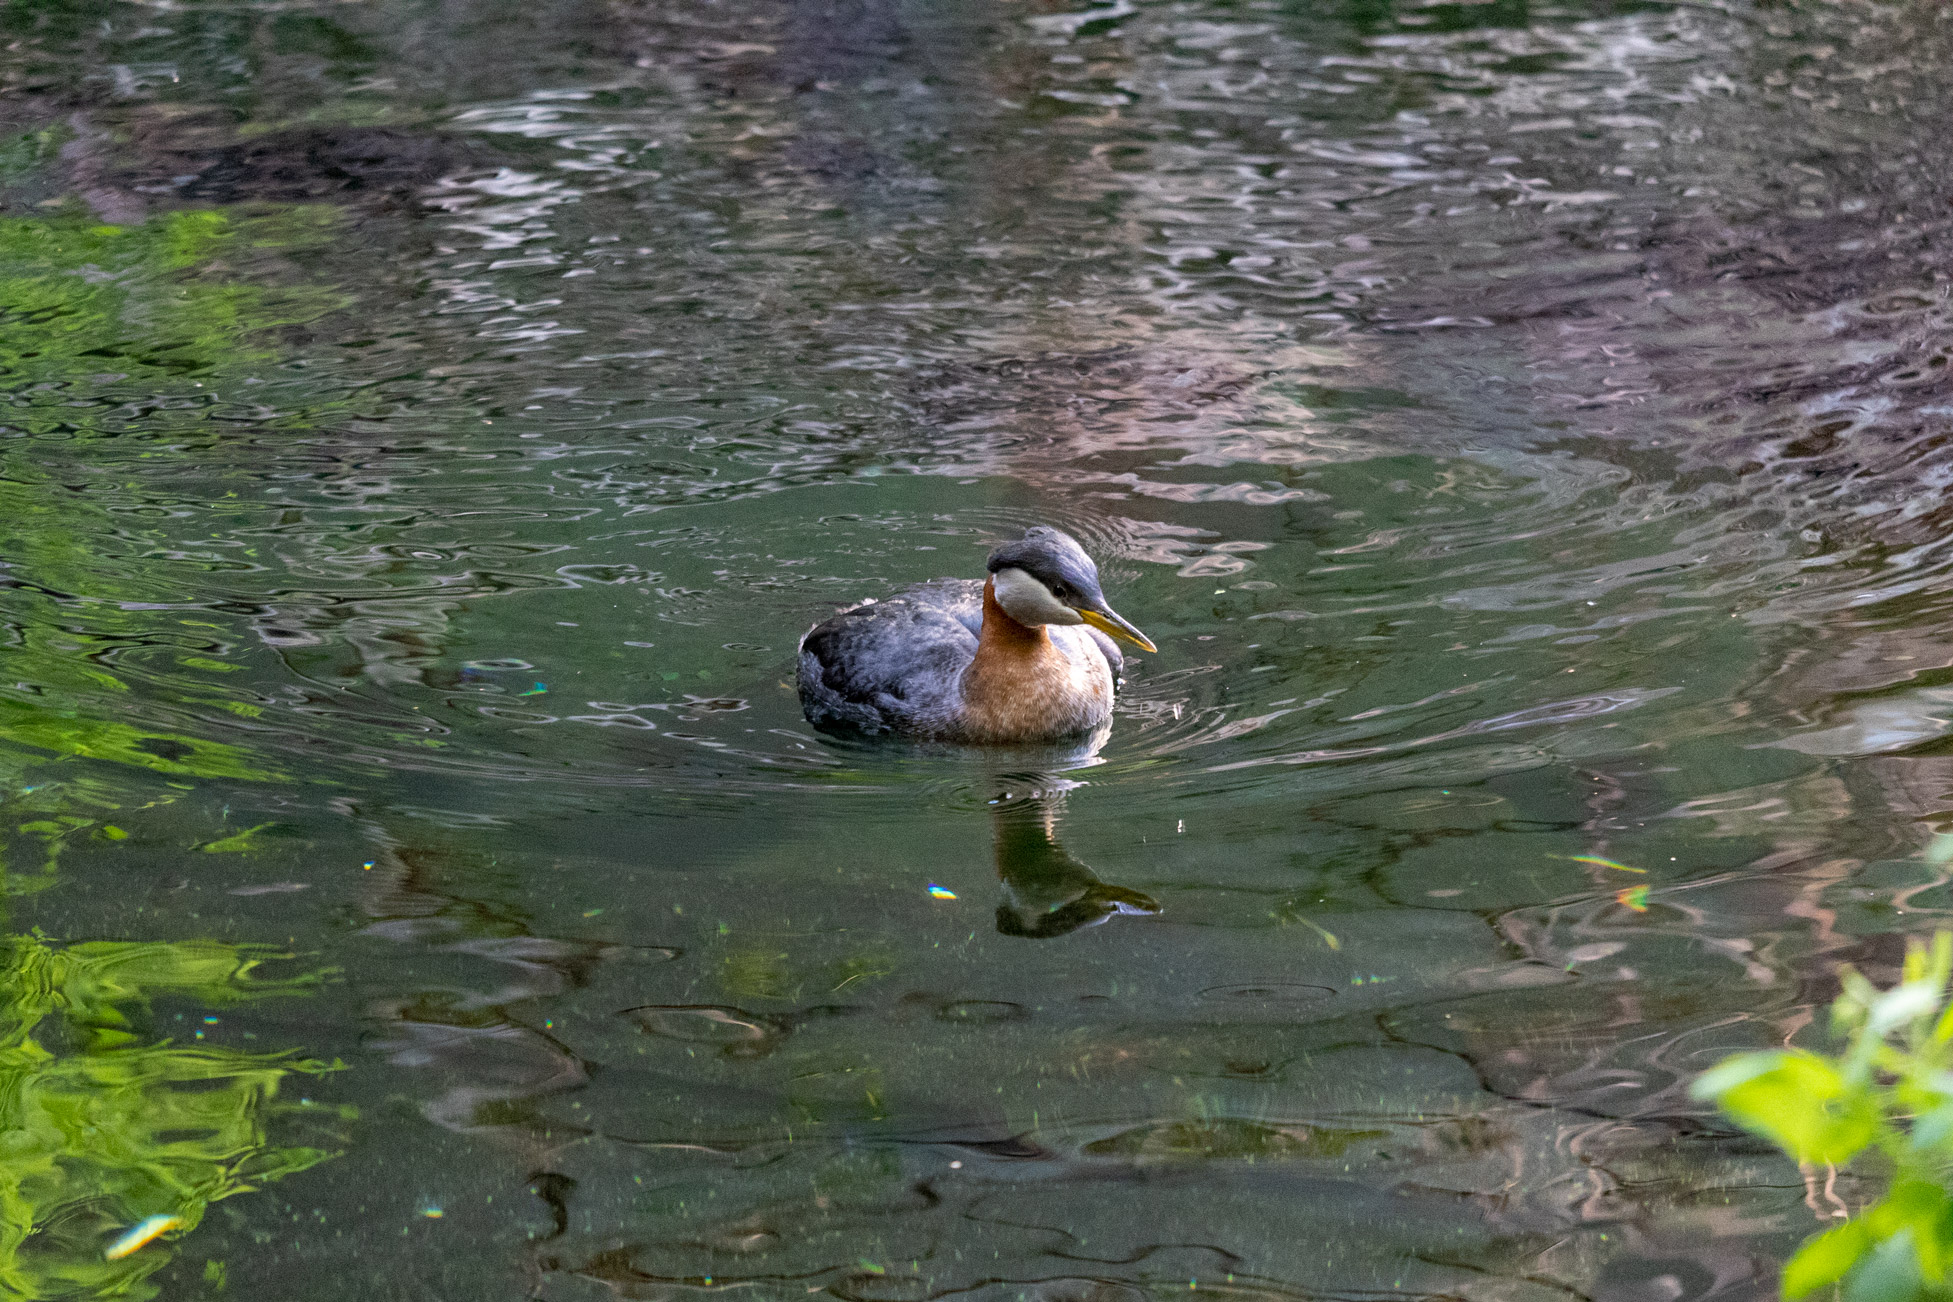 Black, orange, and white bird floating on the water